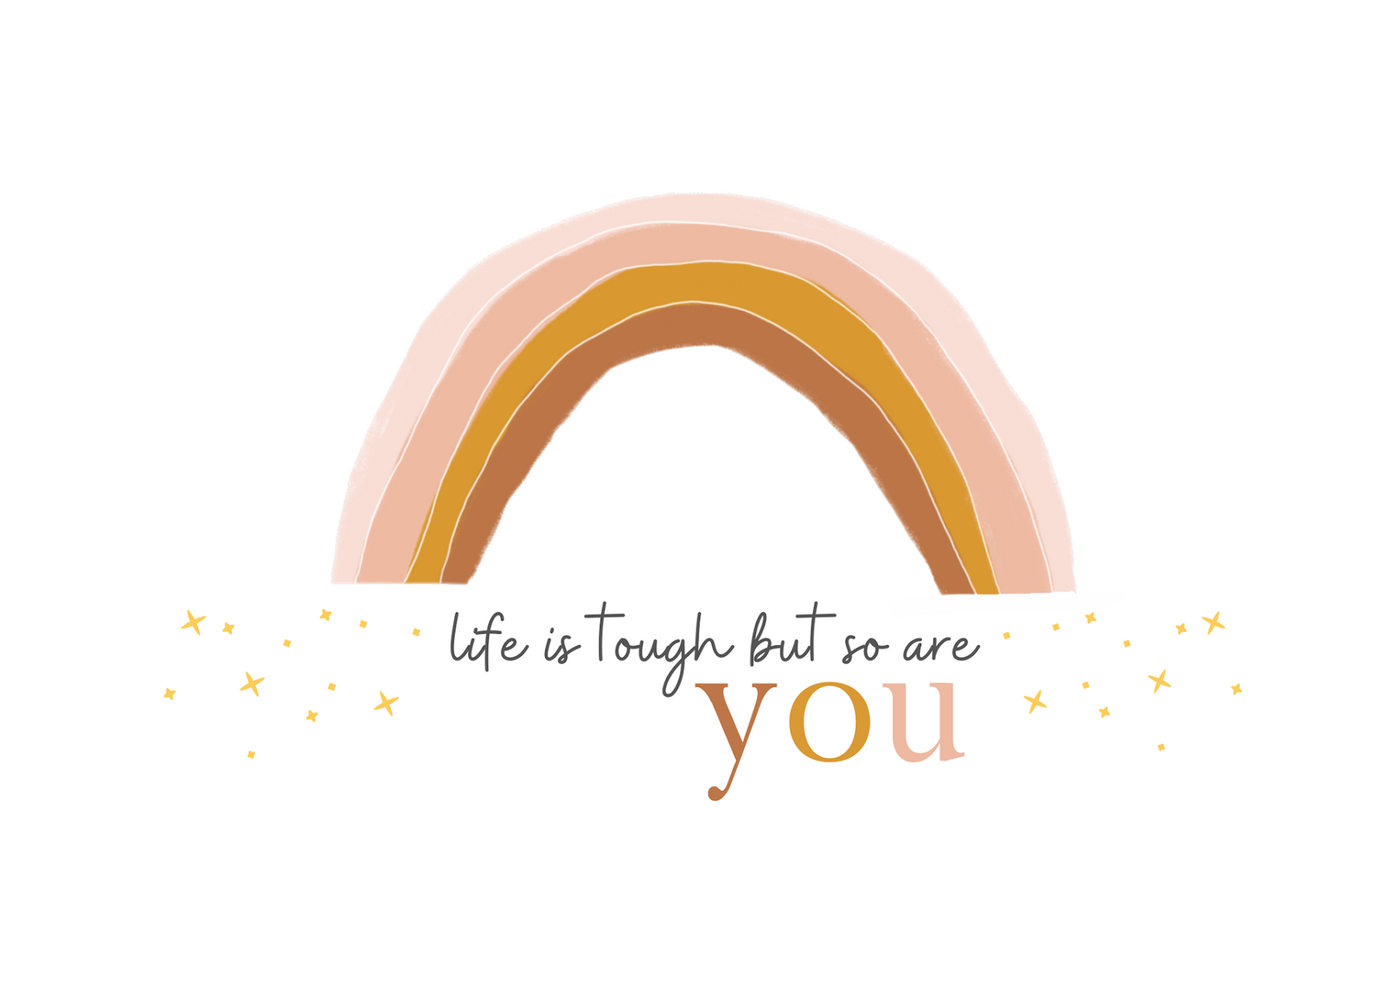 PEACHY LITTLES - LIFE IS TOUGH BUT SO ARE YOU CARD